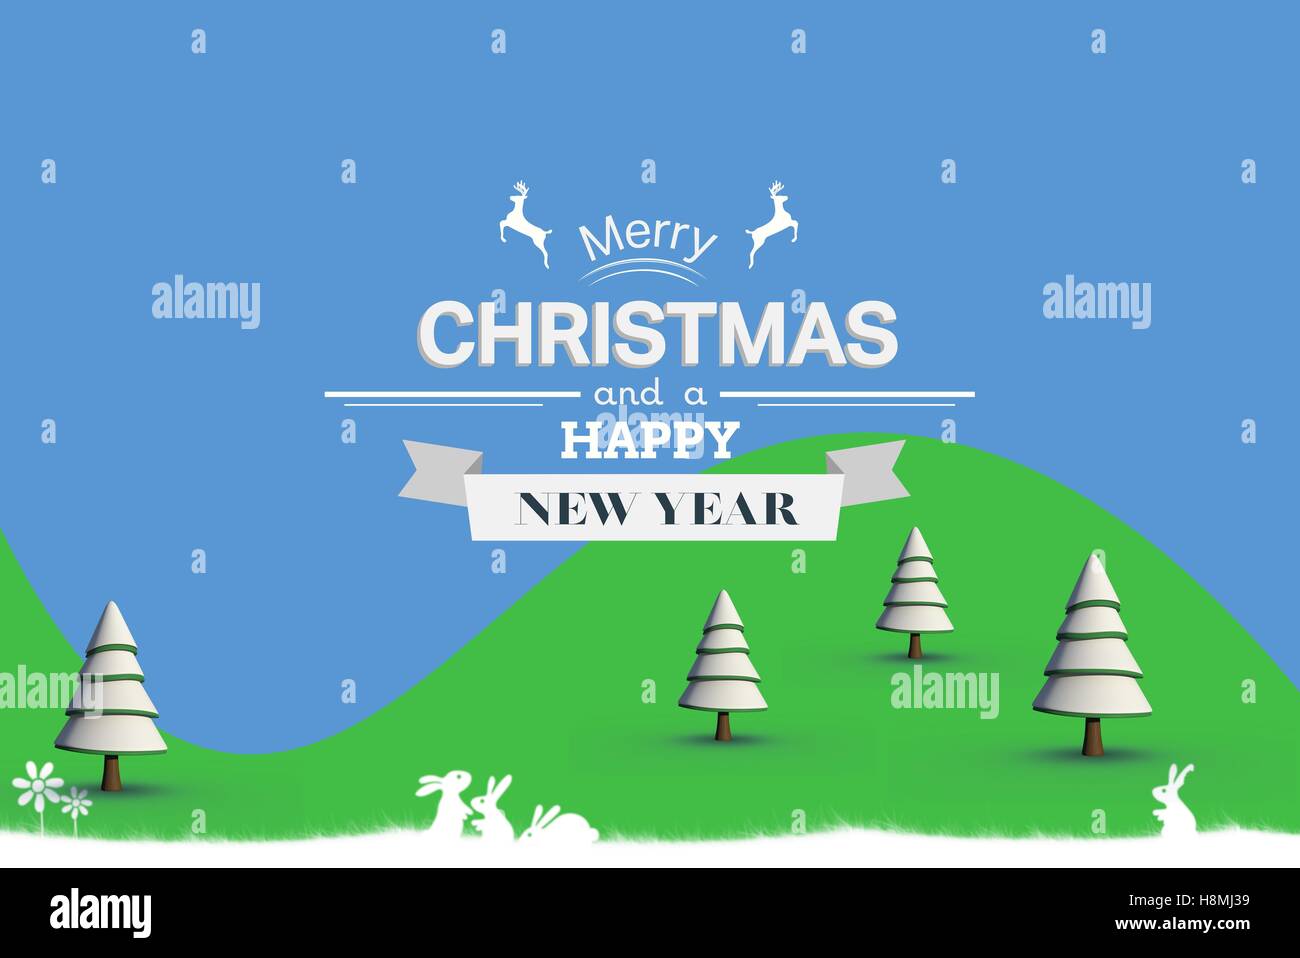 Christmas Message on Valley Design Stock Photo